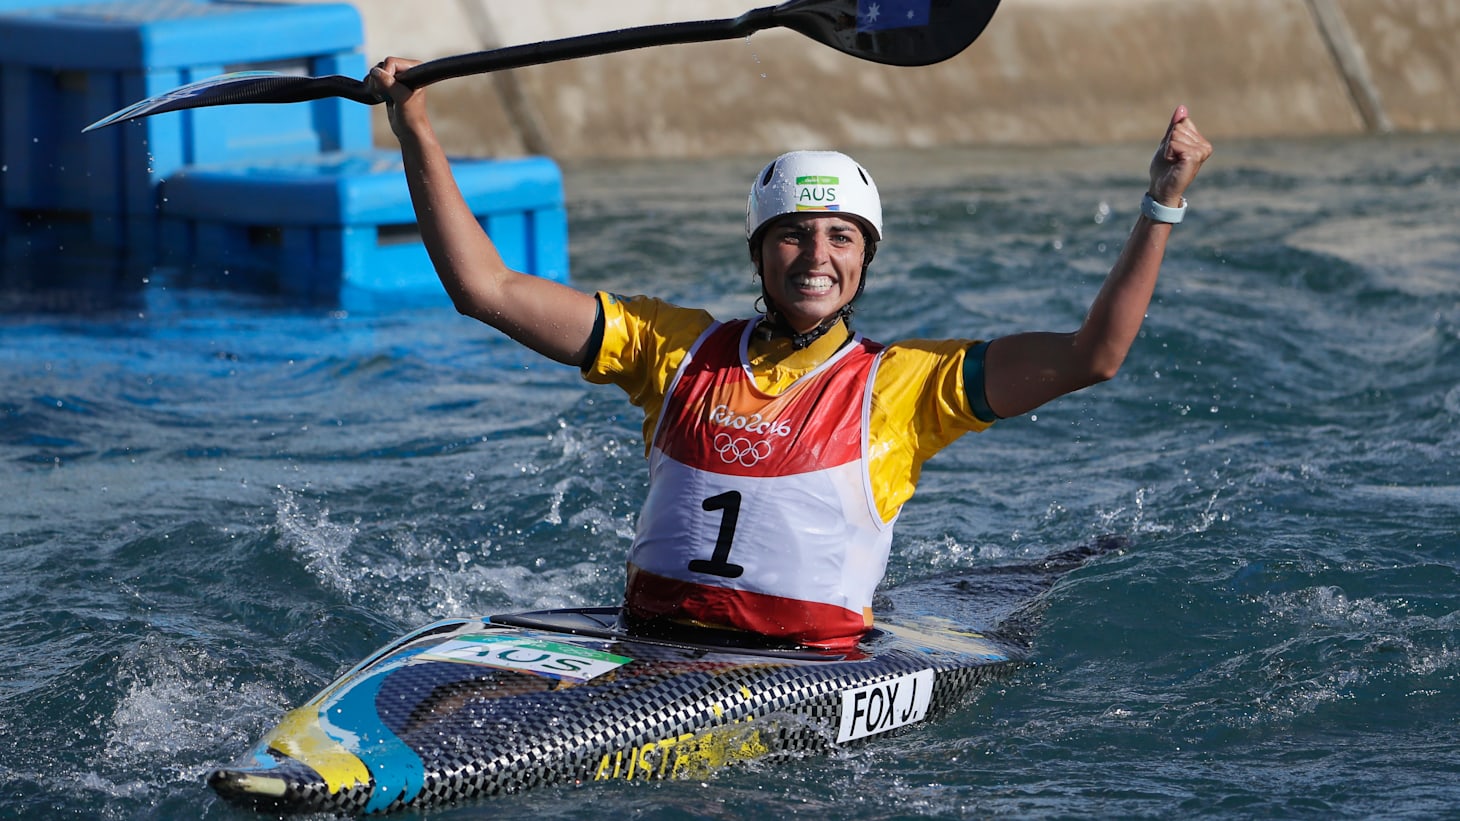 Olympic canoe slalom at Tokyo 2020 Top five things to know